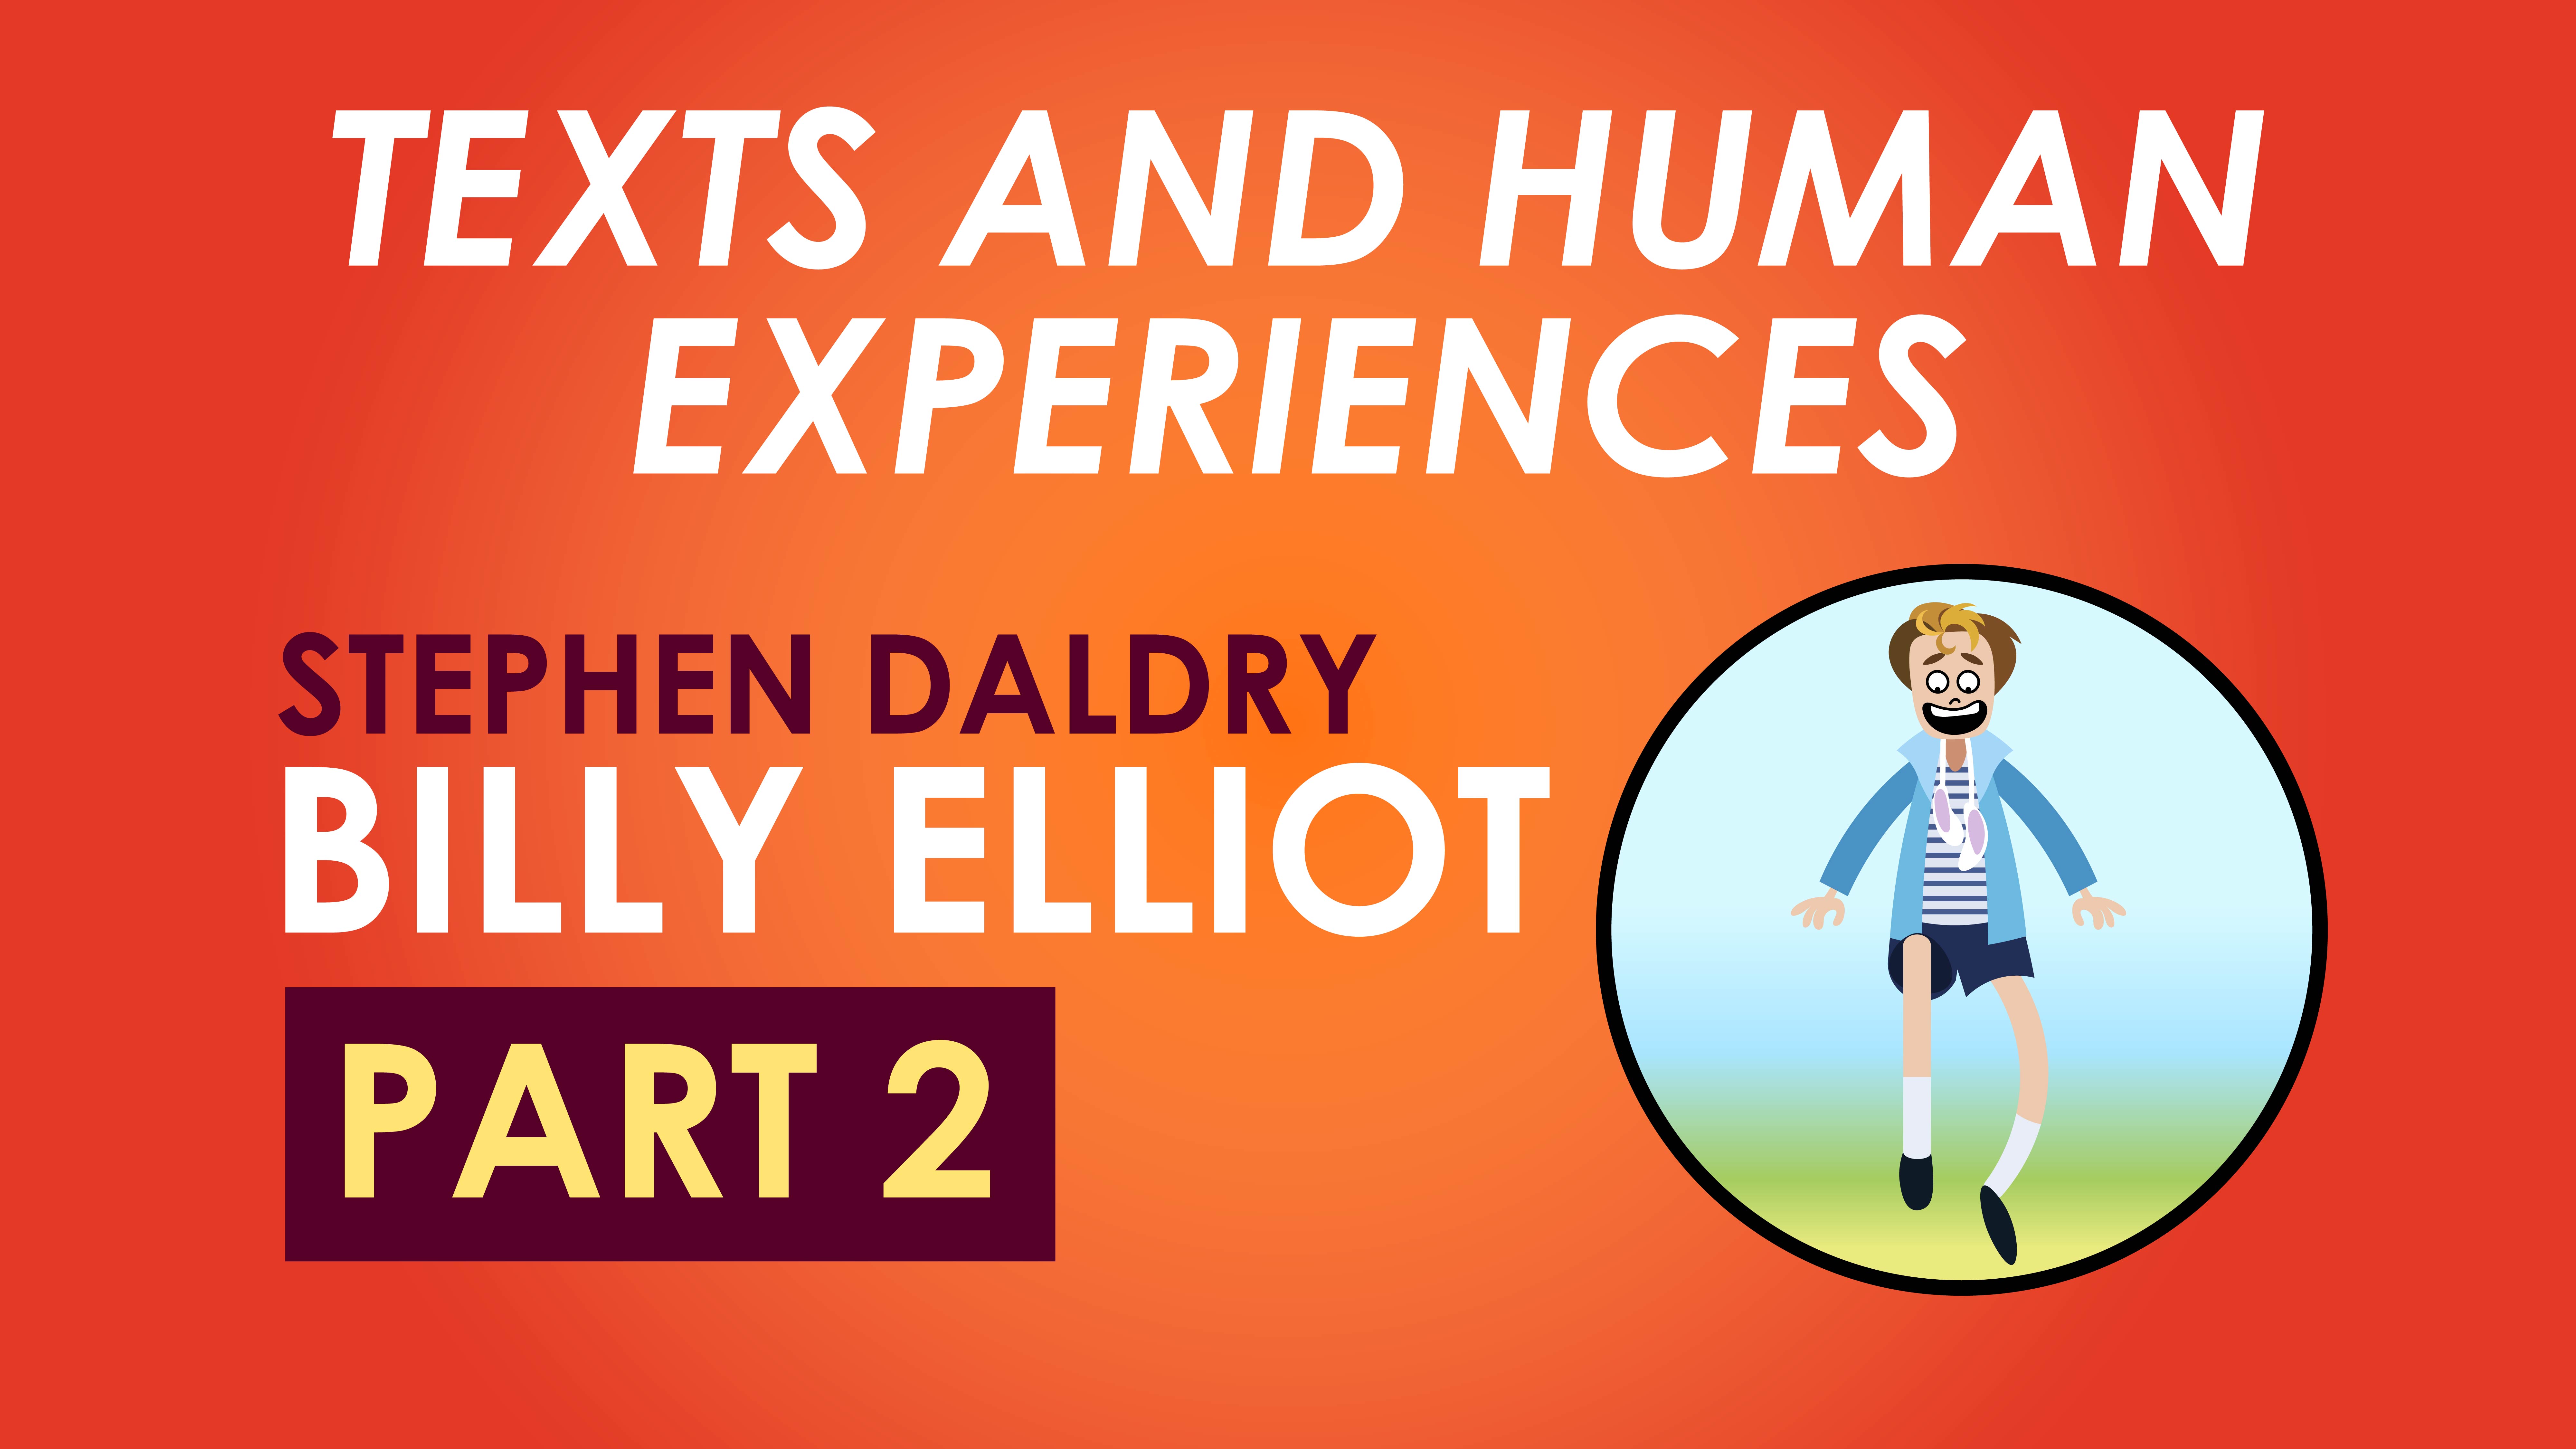 HSC Texts and Human Experiences - Billy Elliot, by Stephen Daldry - Part 2